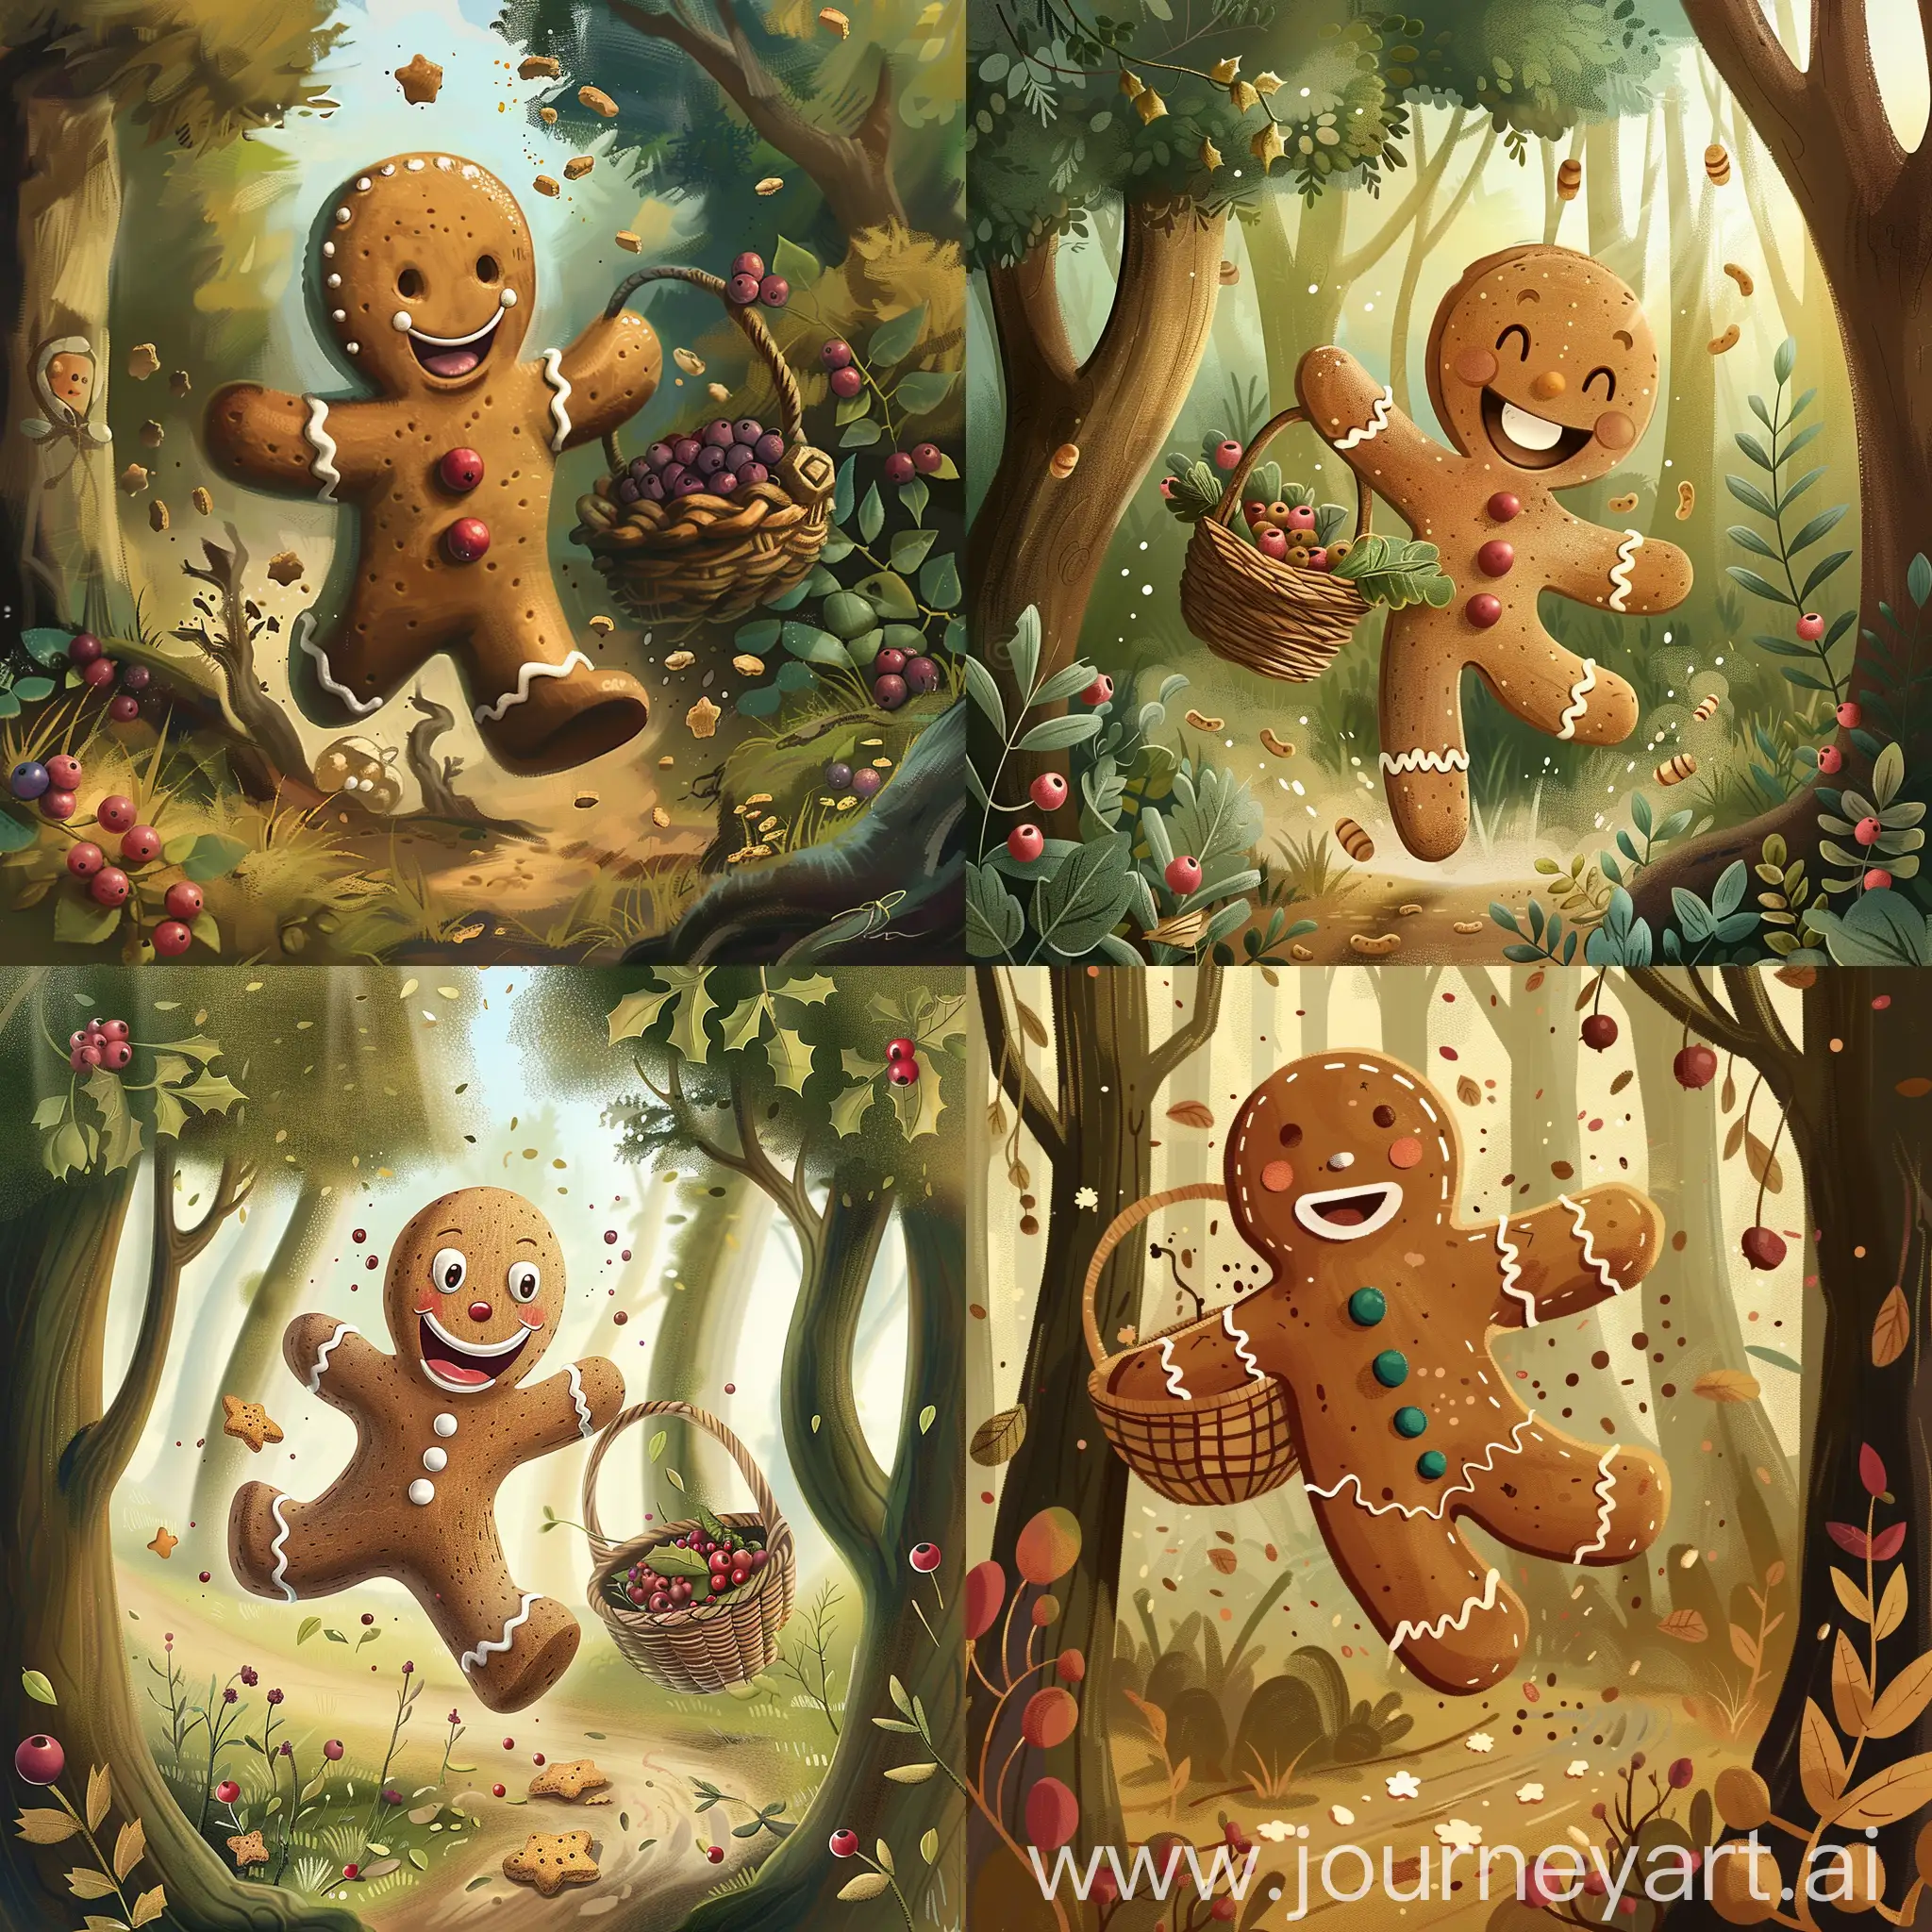 Cheerful-Gingerbread-Man-Running-Through-Forest-with-Berries-Basket